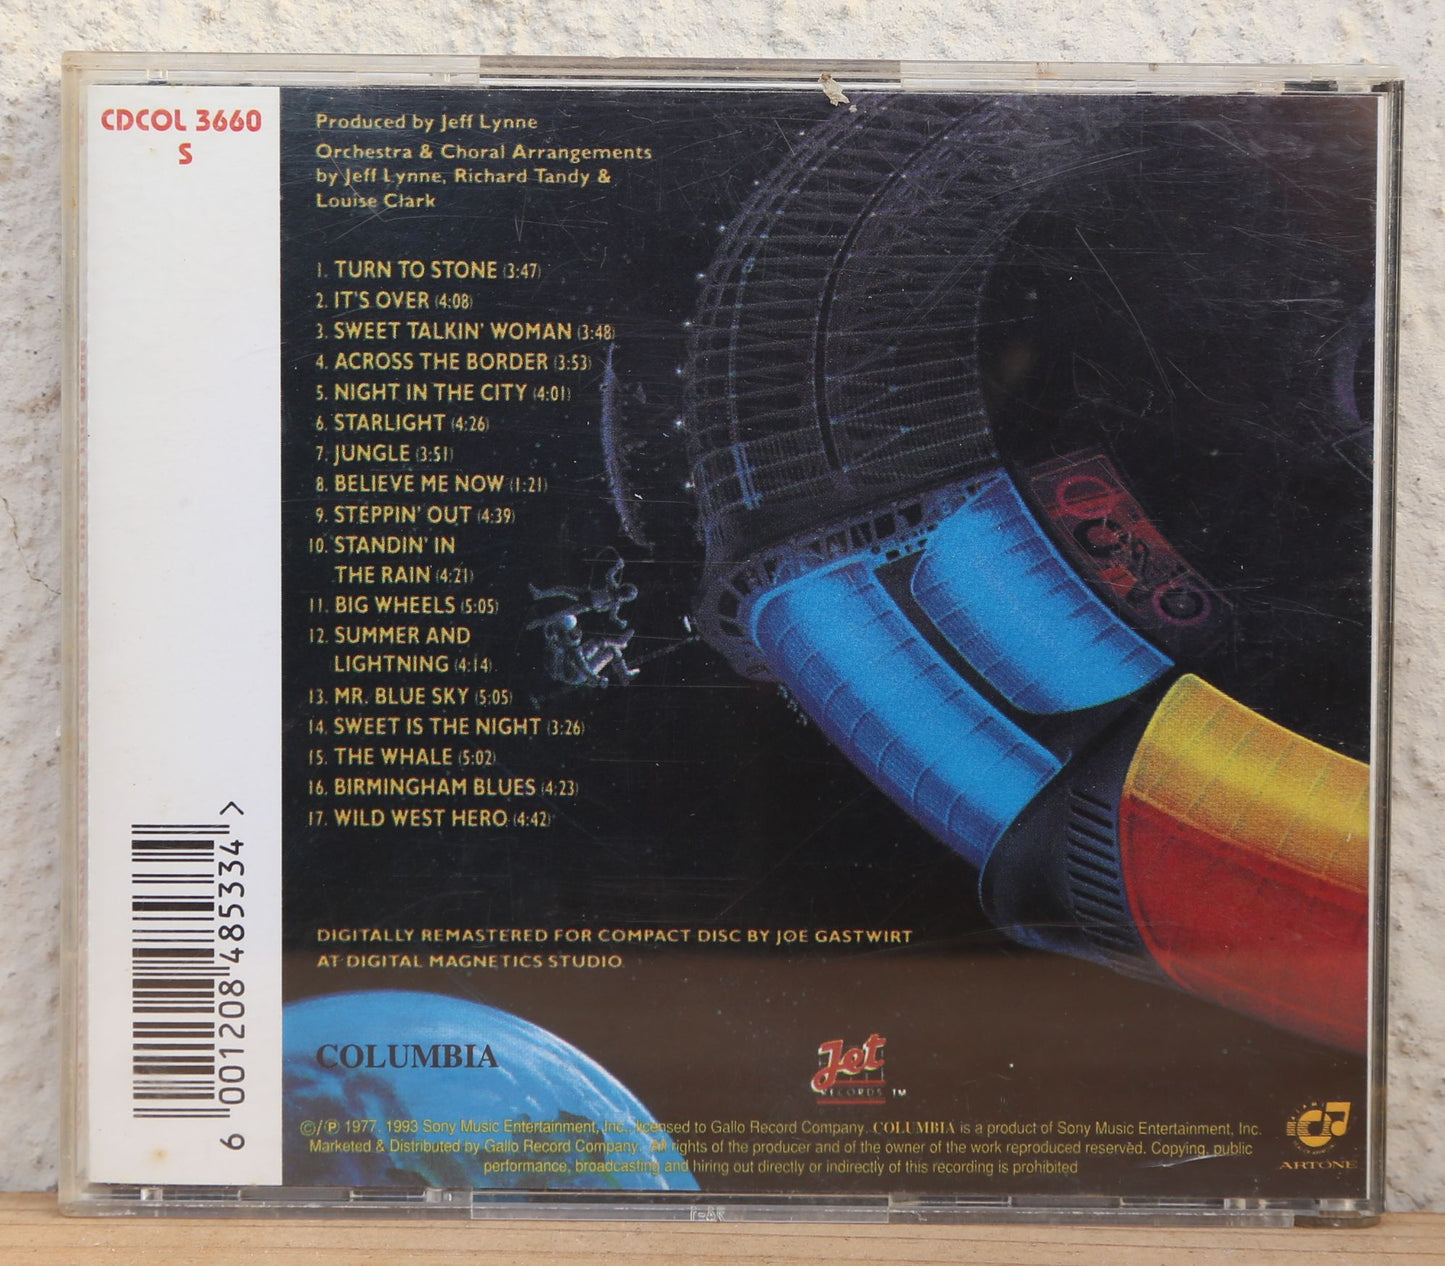 Electric Light Orchestra - Out of the blue (cd)